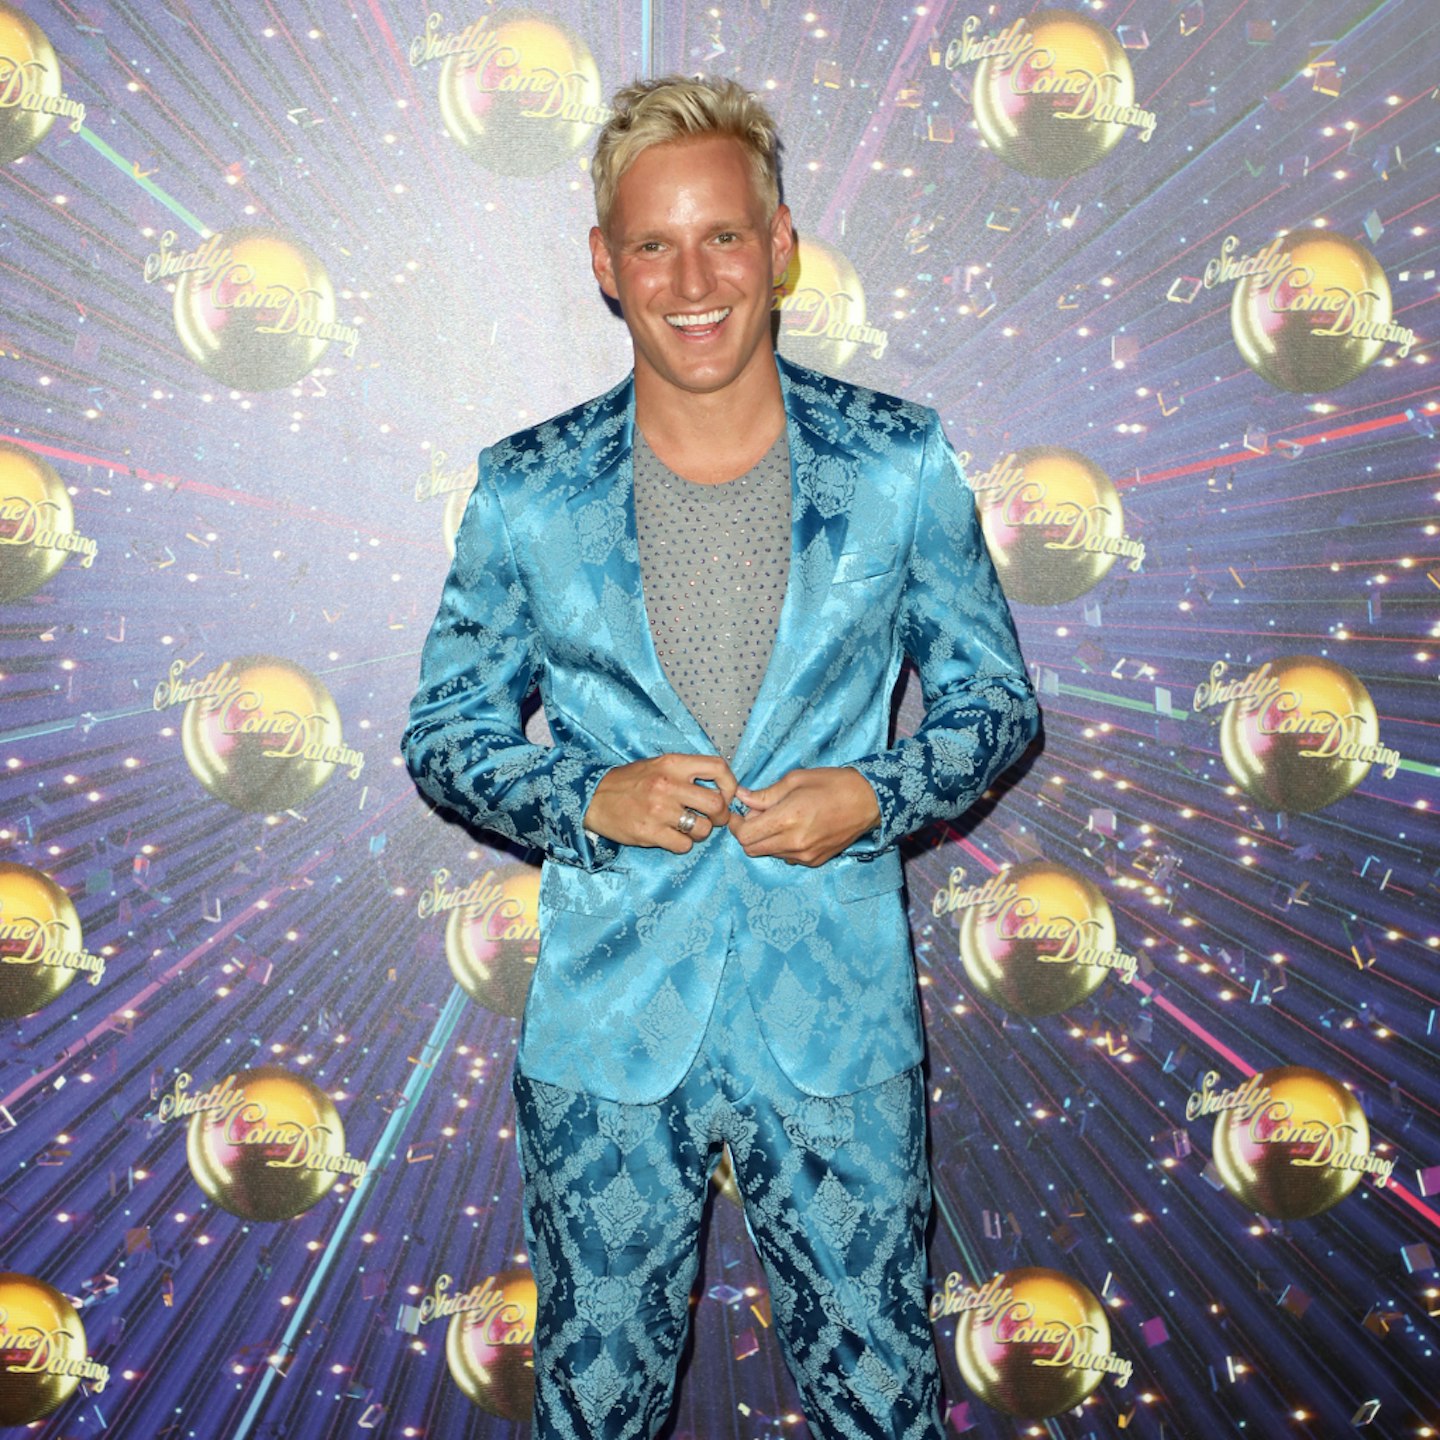 Jamie laing strictly come dancing